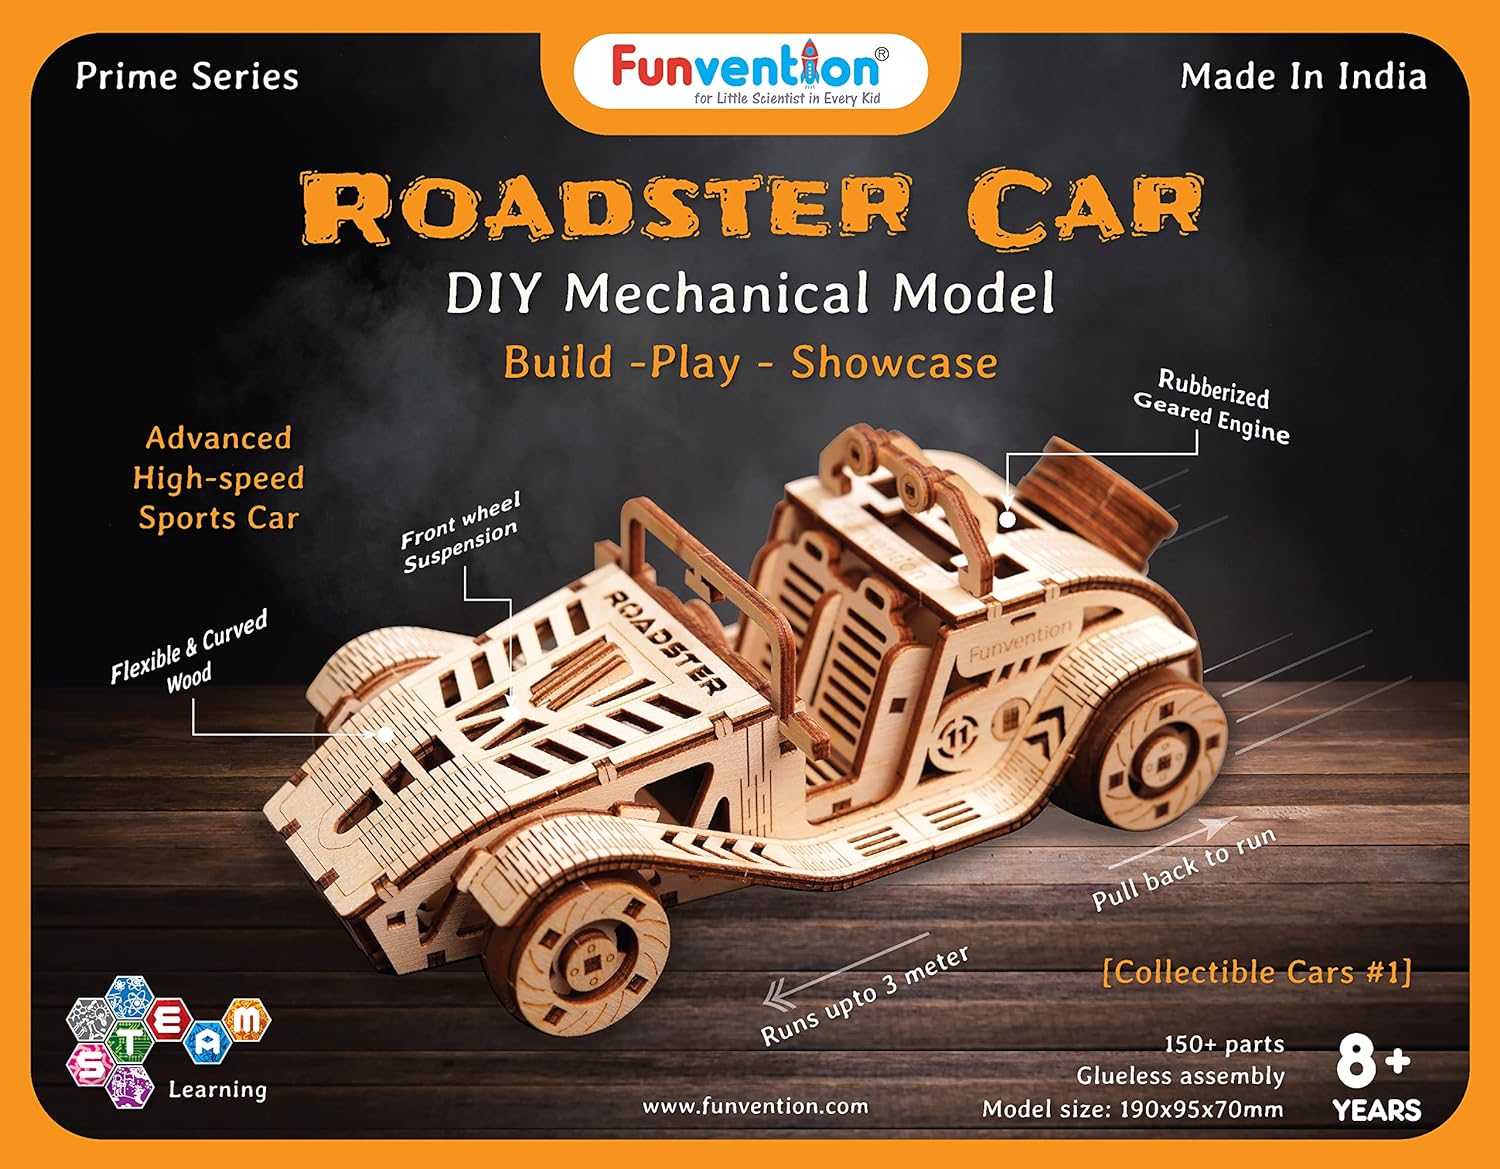 FUNVENTION Roadster Car - DIY Functional Mechanical Model 3D Puzzle STEM Lerning Kit Collectible Cars Building Kit with Working Wheels & Shocks